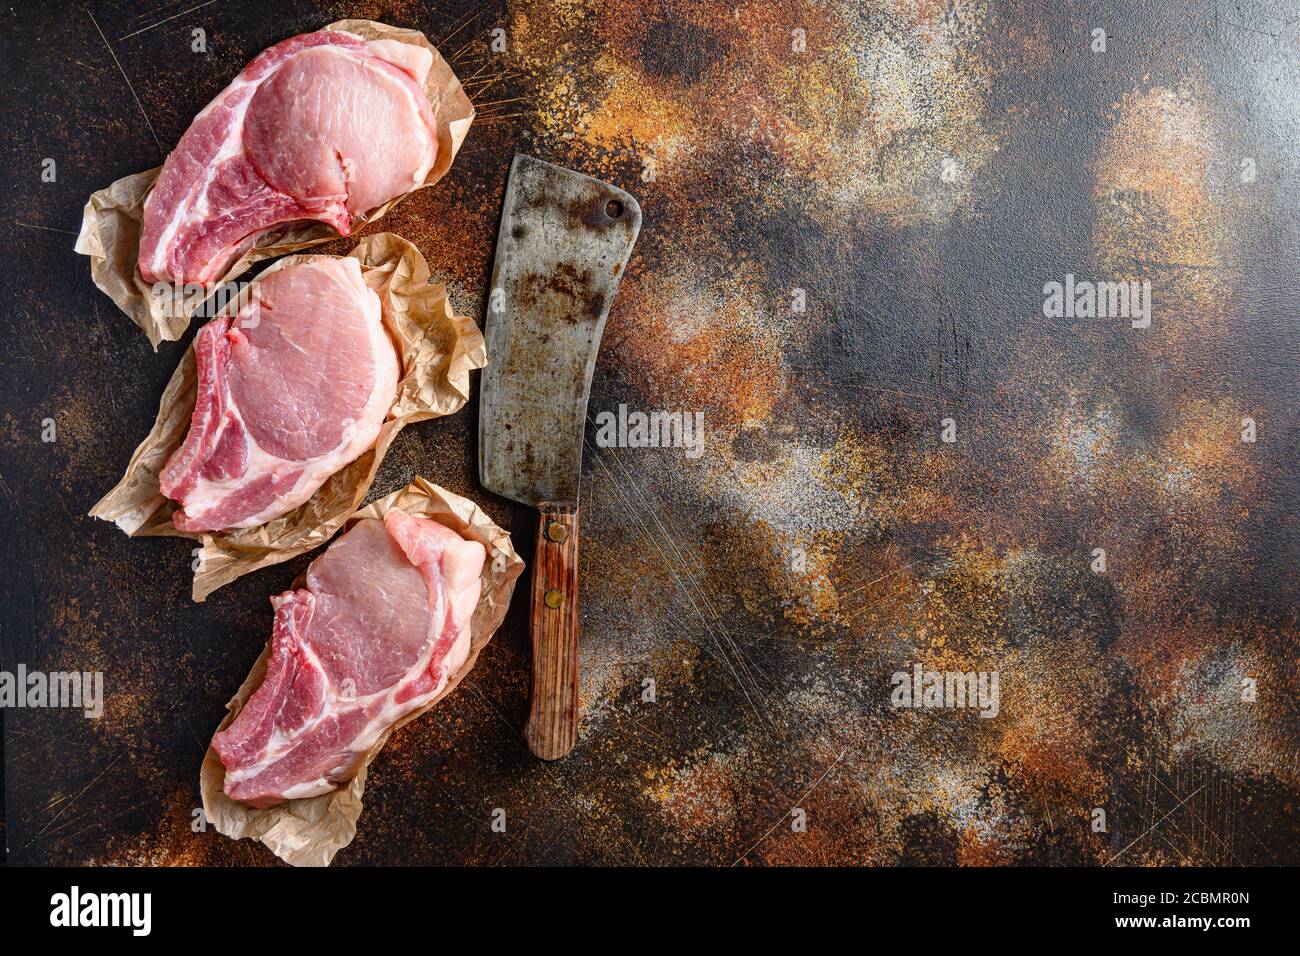 Bunch Pork steaks, fillets for grilling, baking or frying, Pork with ribs. Tenderloin. Entrecote warped in paper with butcher cleaver on side over Stock Photo